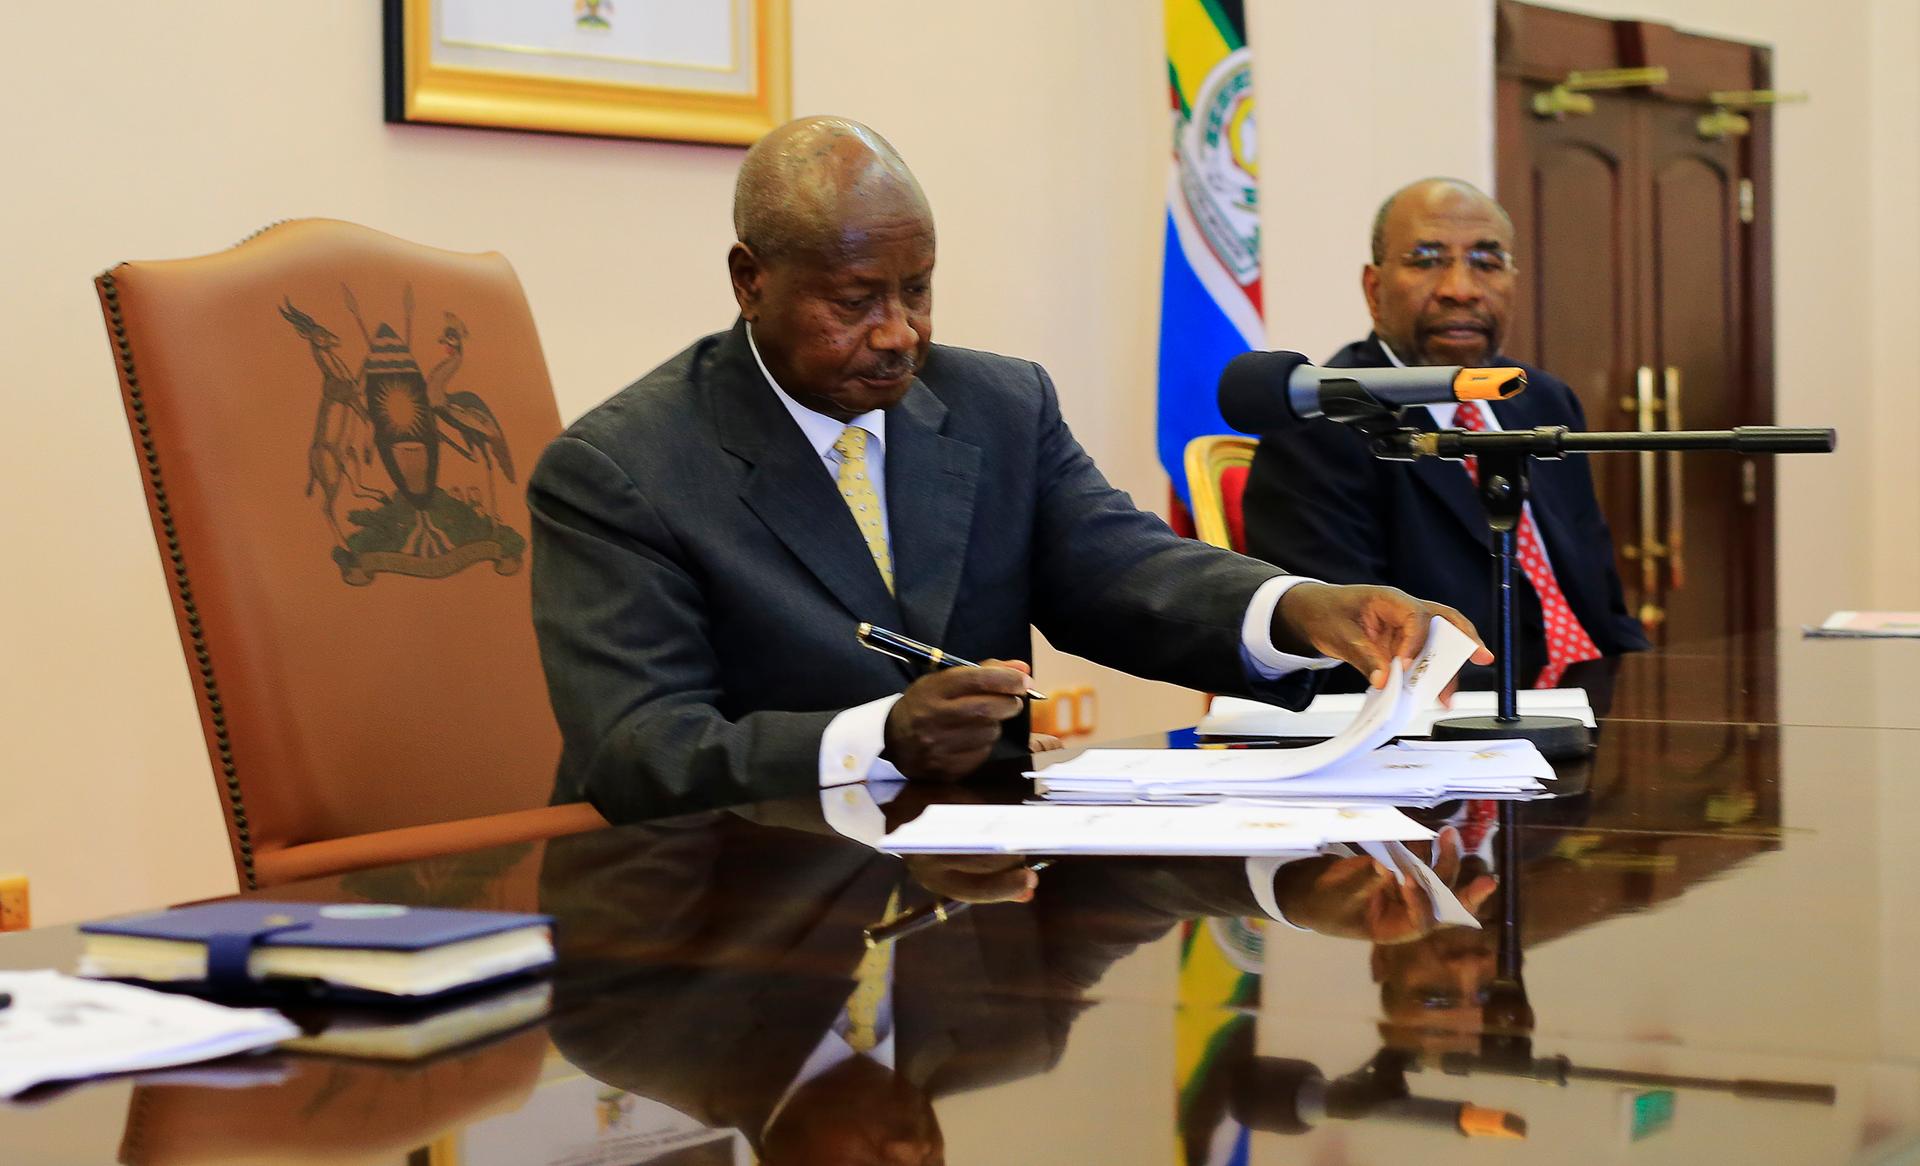 Uganda's President Yoweri Museveni signs an anti-gay bill into law at the state house in Entebbe, southwest of the capital Kampala, Feb. 24, 2014.